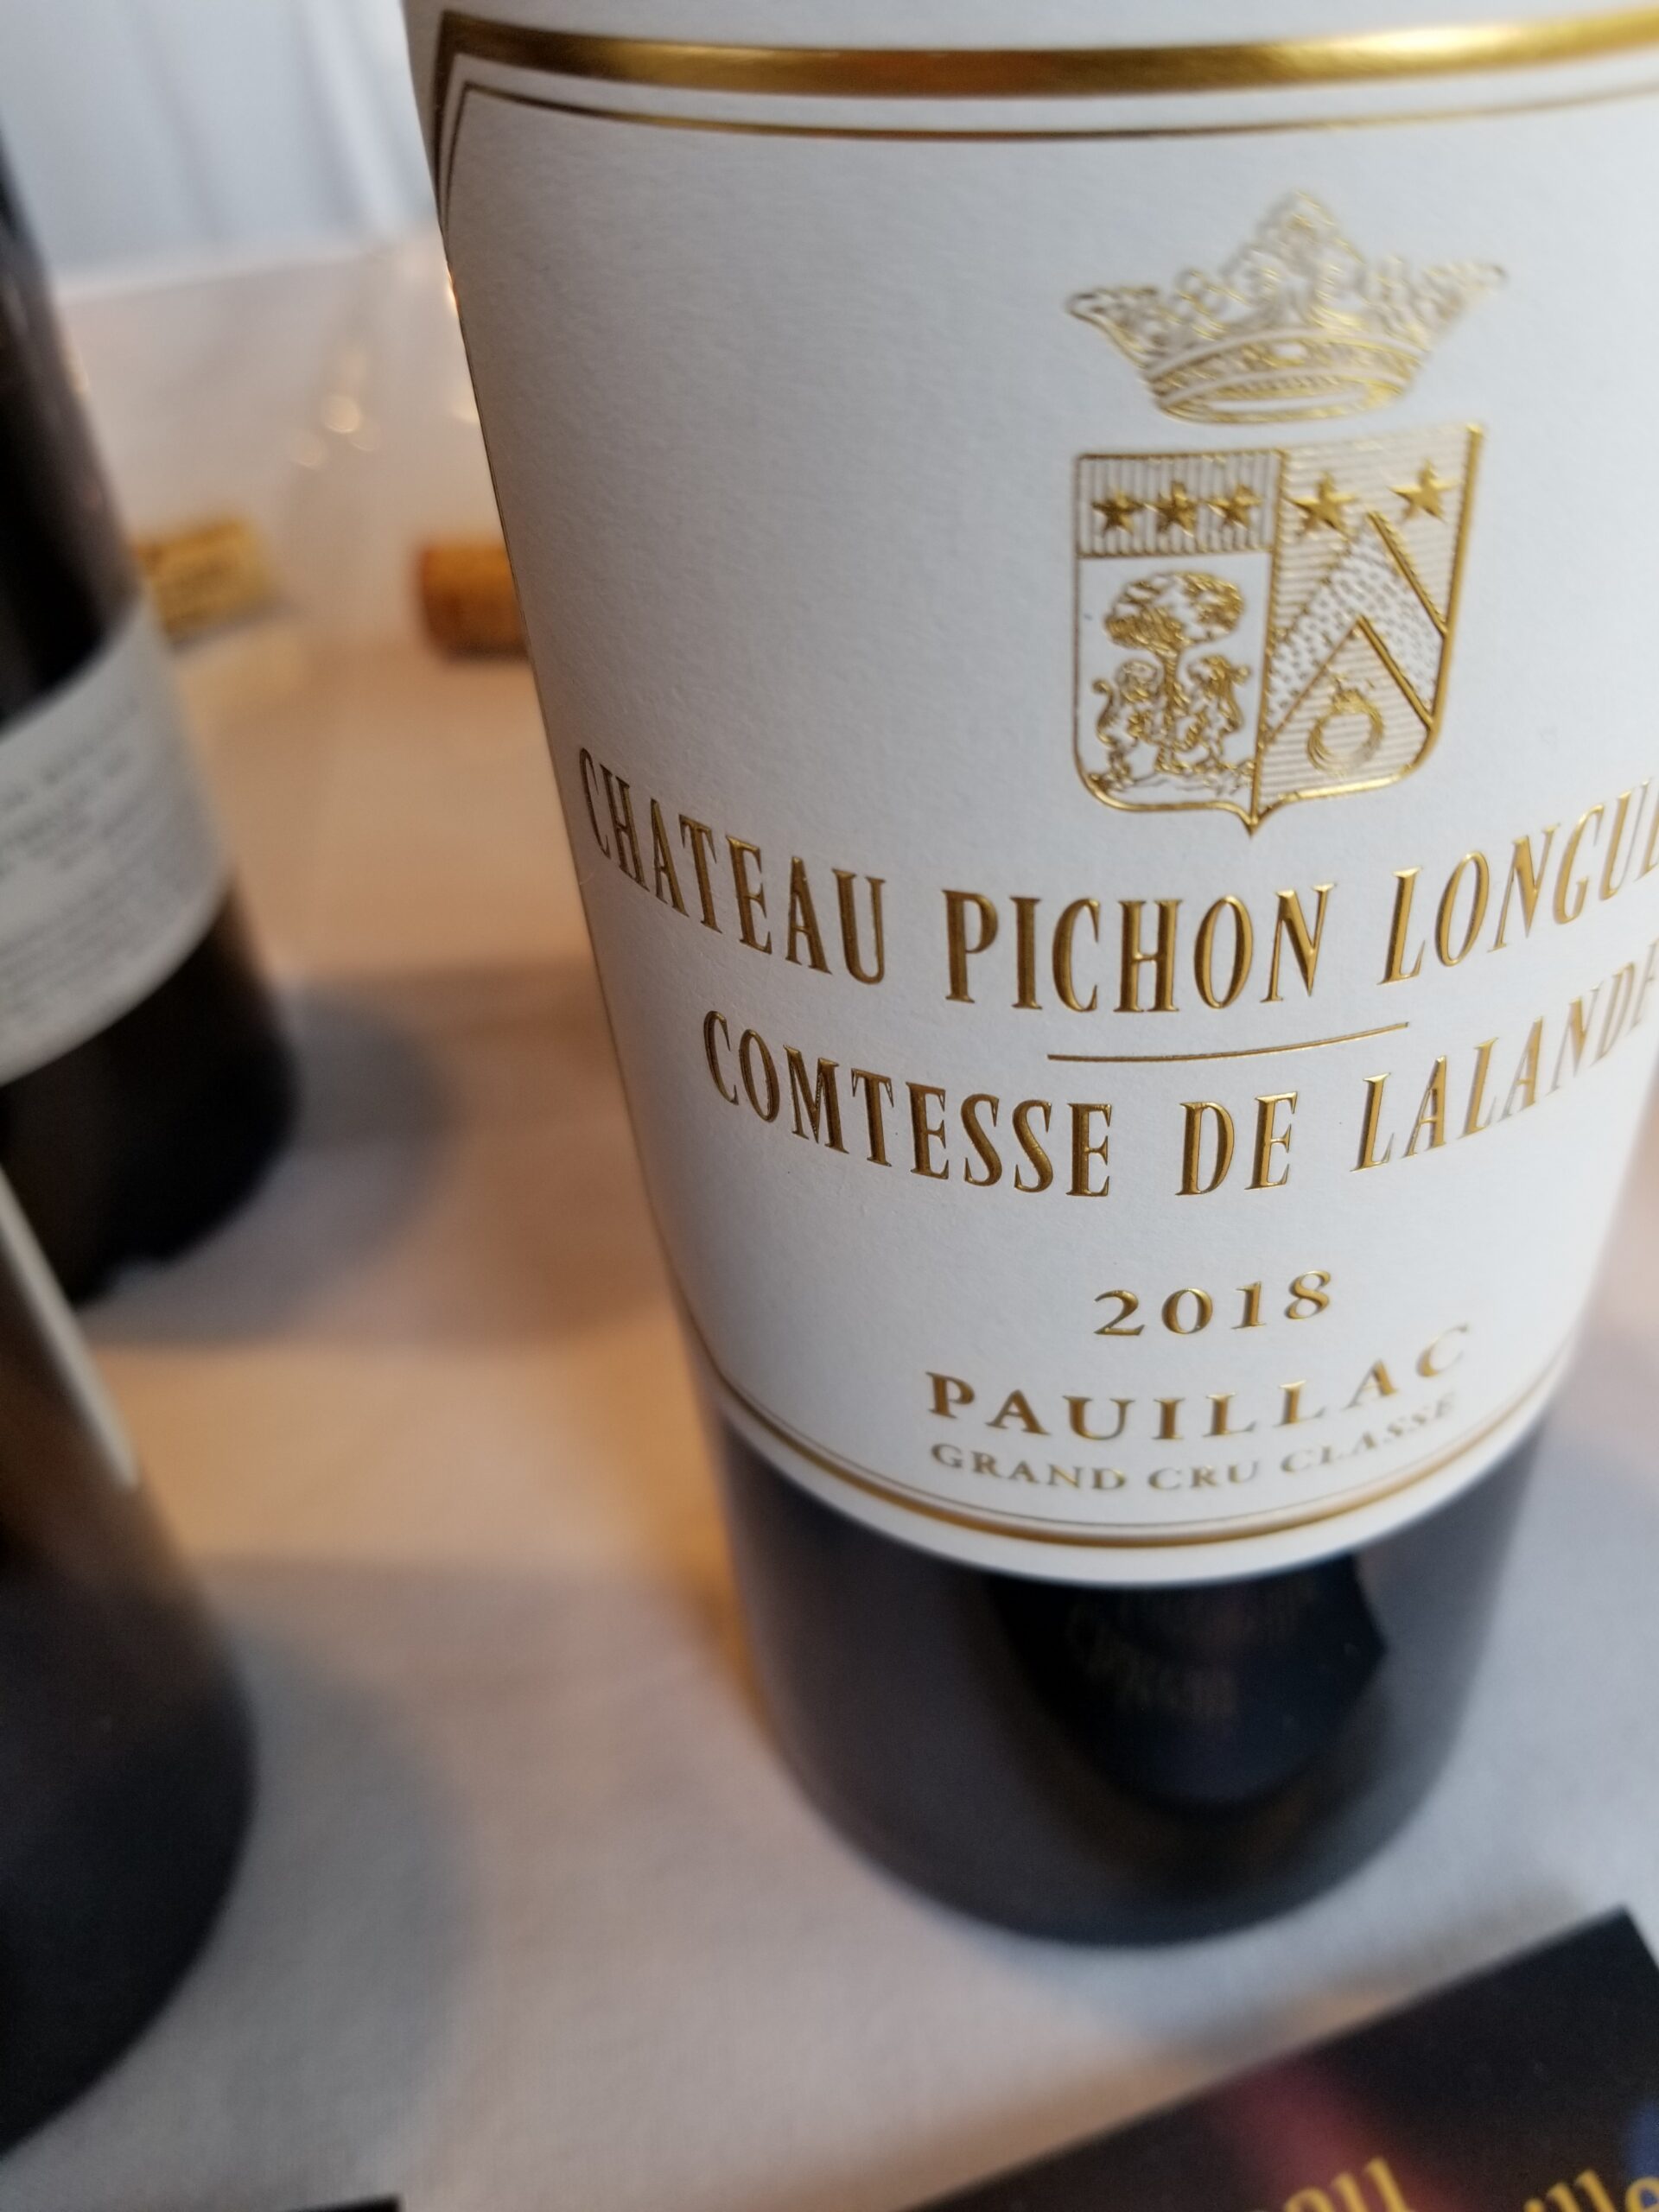 – Bottling Review Bordeaux TerroirSense A Look the the Line: Fresh off at Available Wine 2018 Wines Now